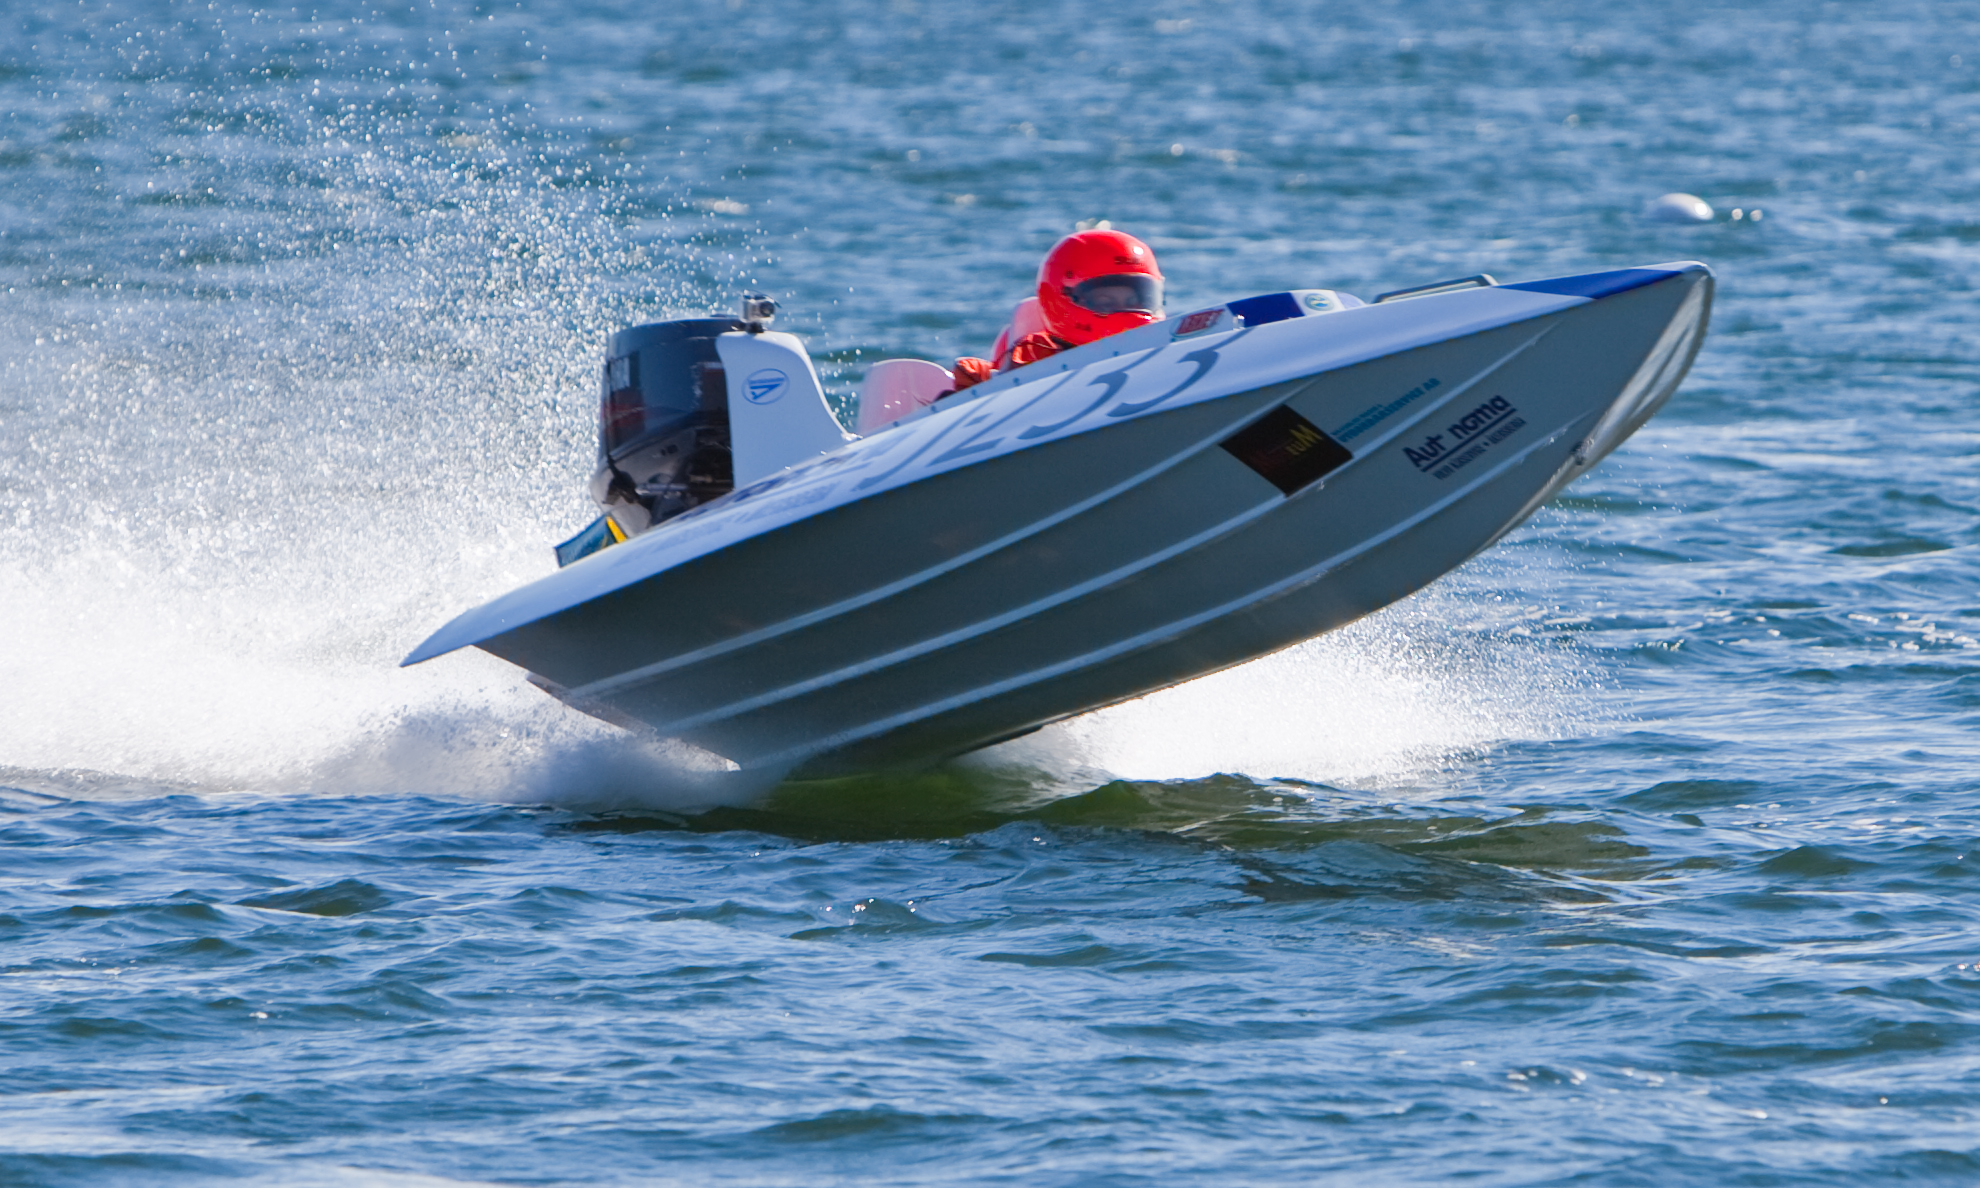 a man is in the water riding a speedboat